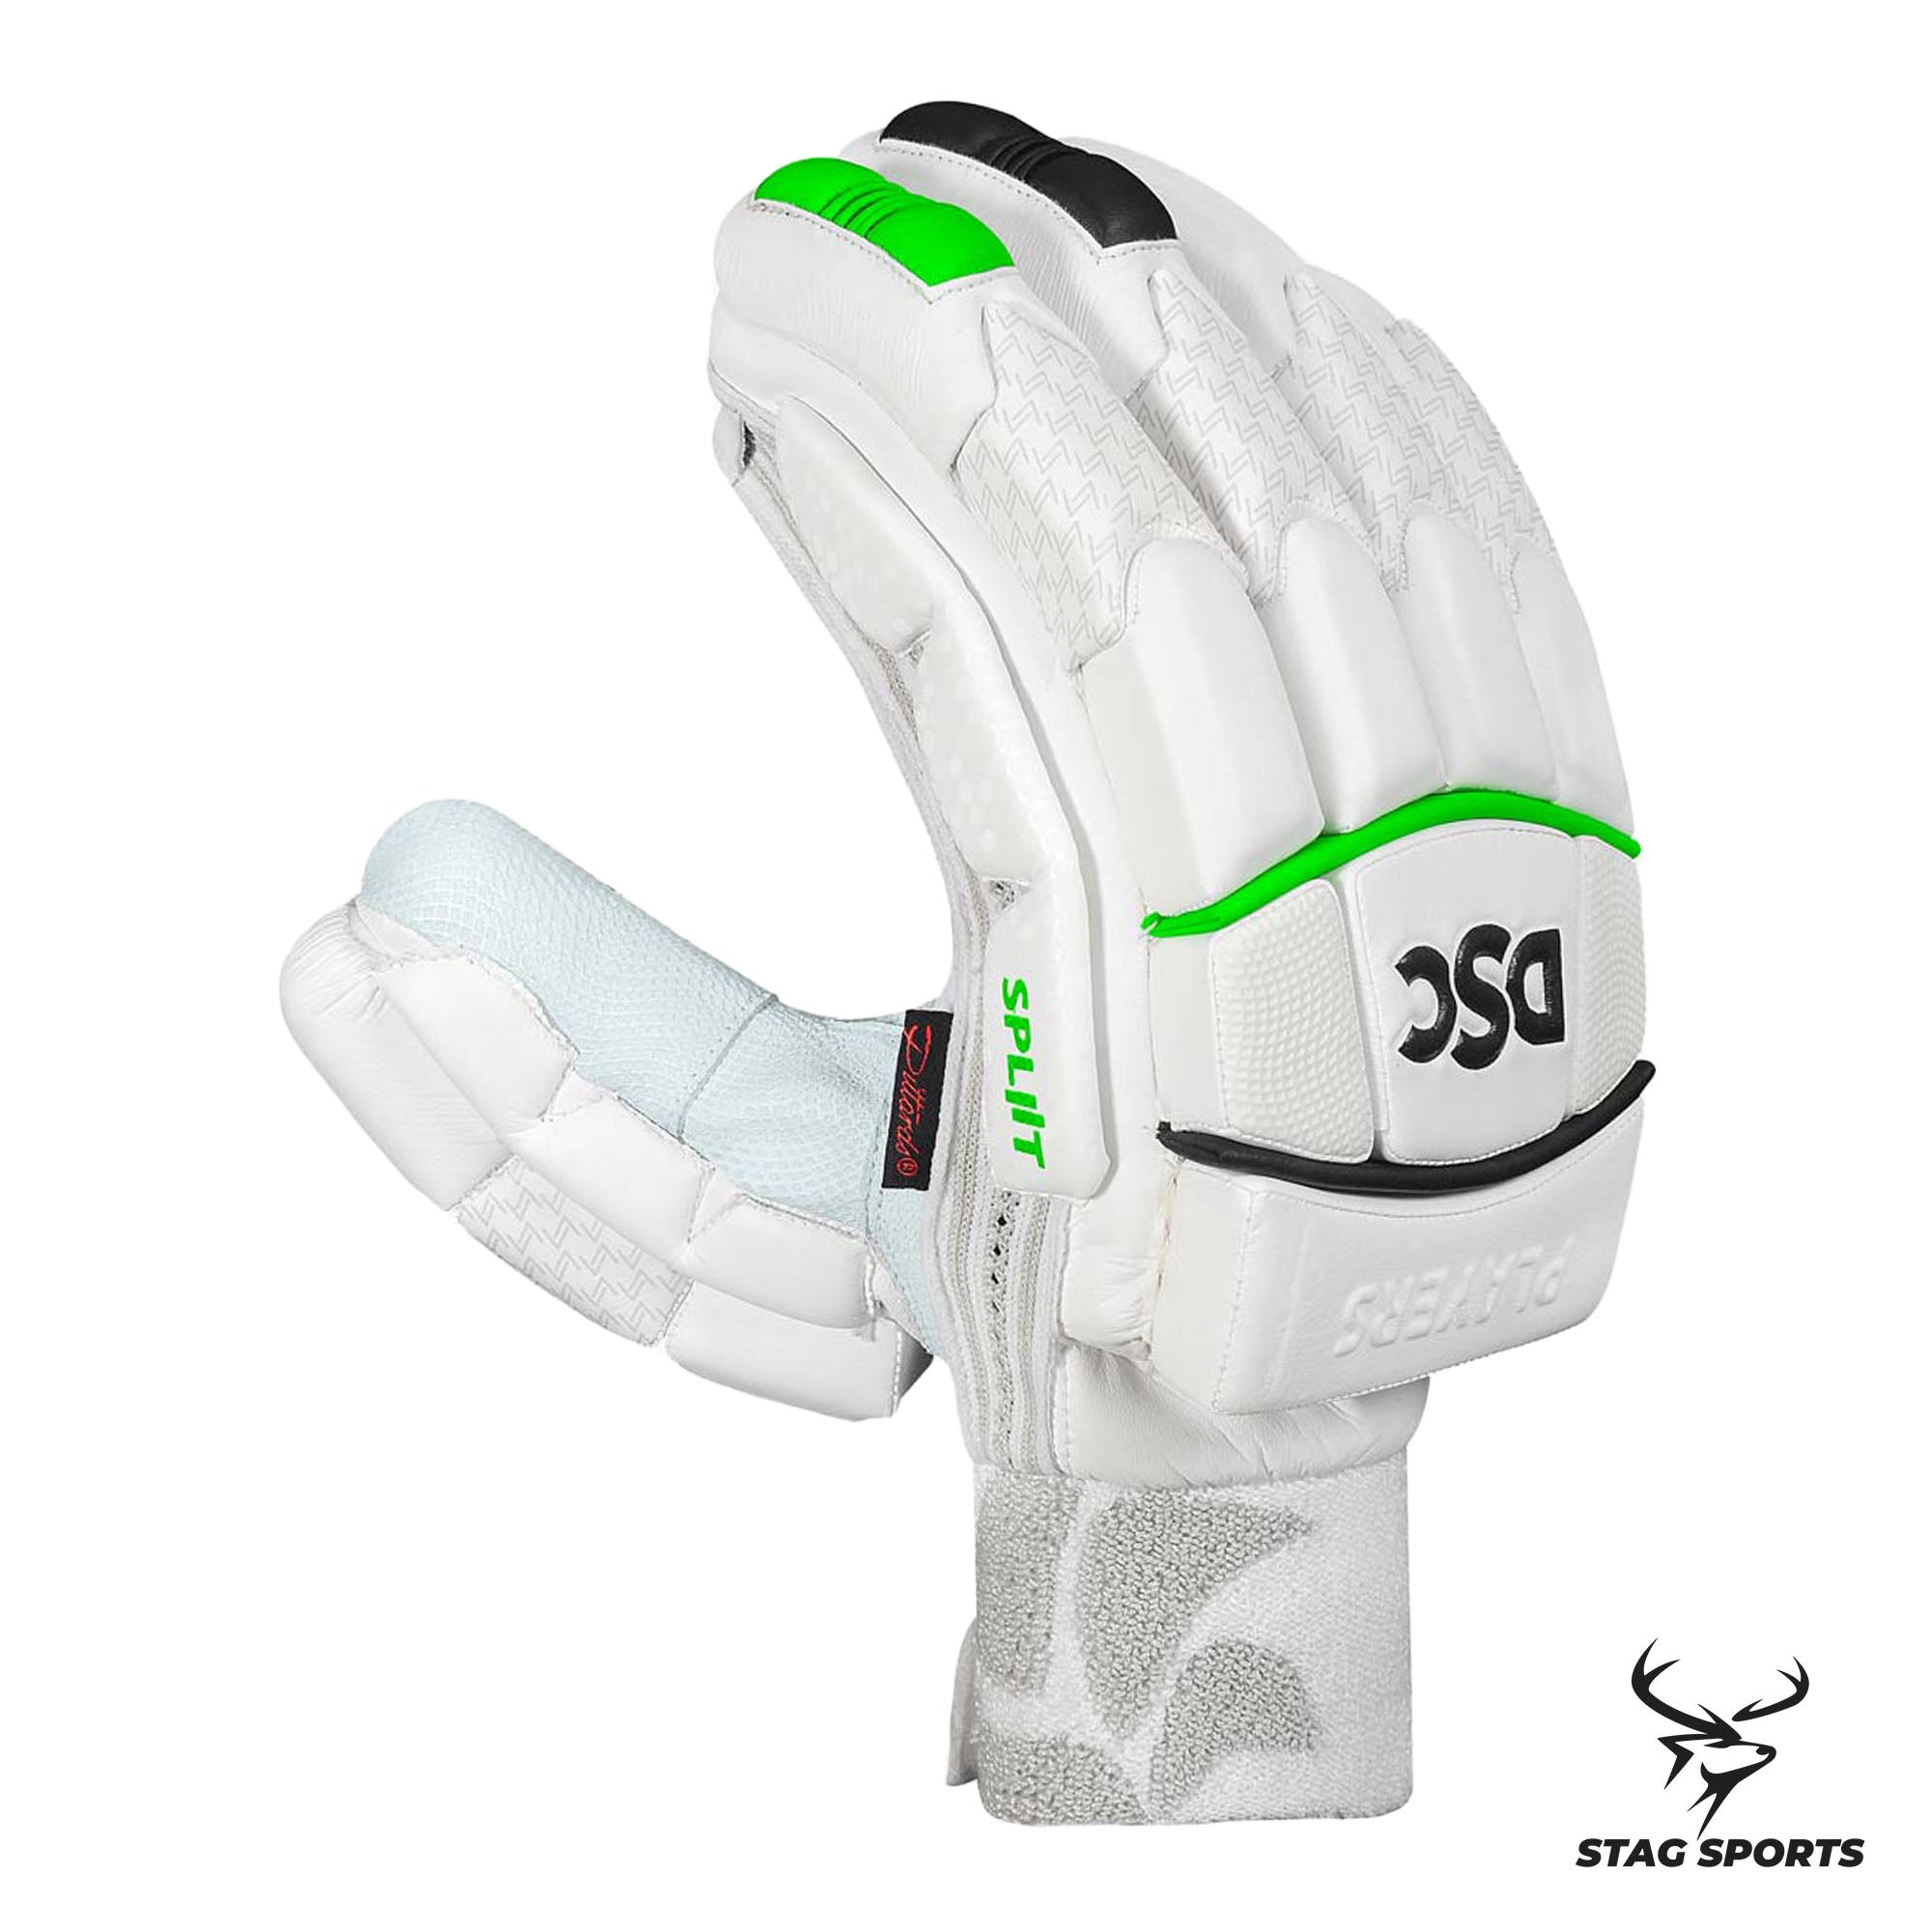 Buy Online From Stag Sports Australia